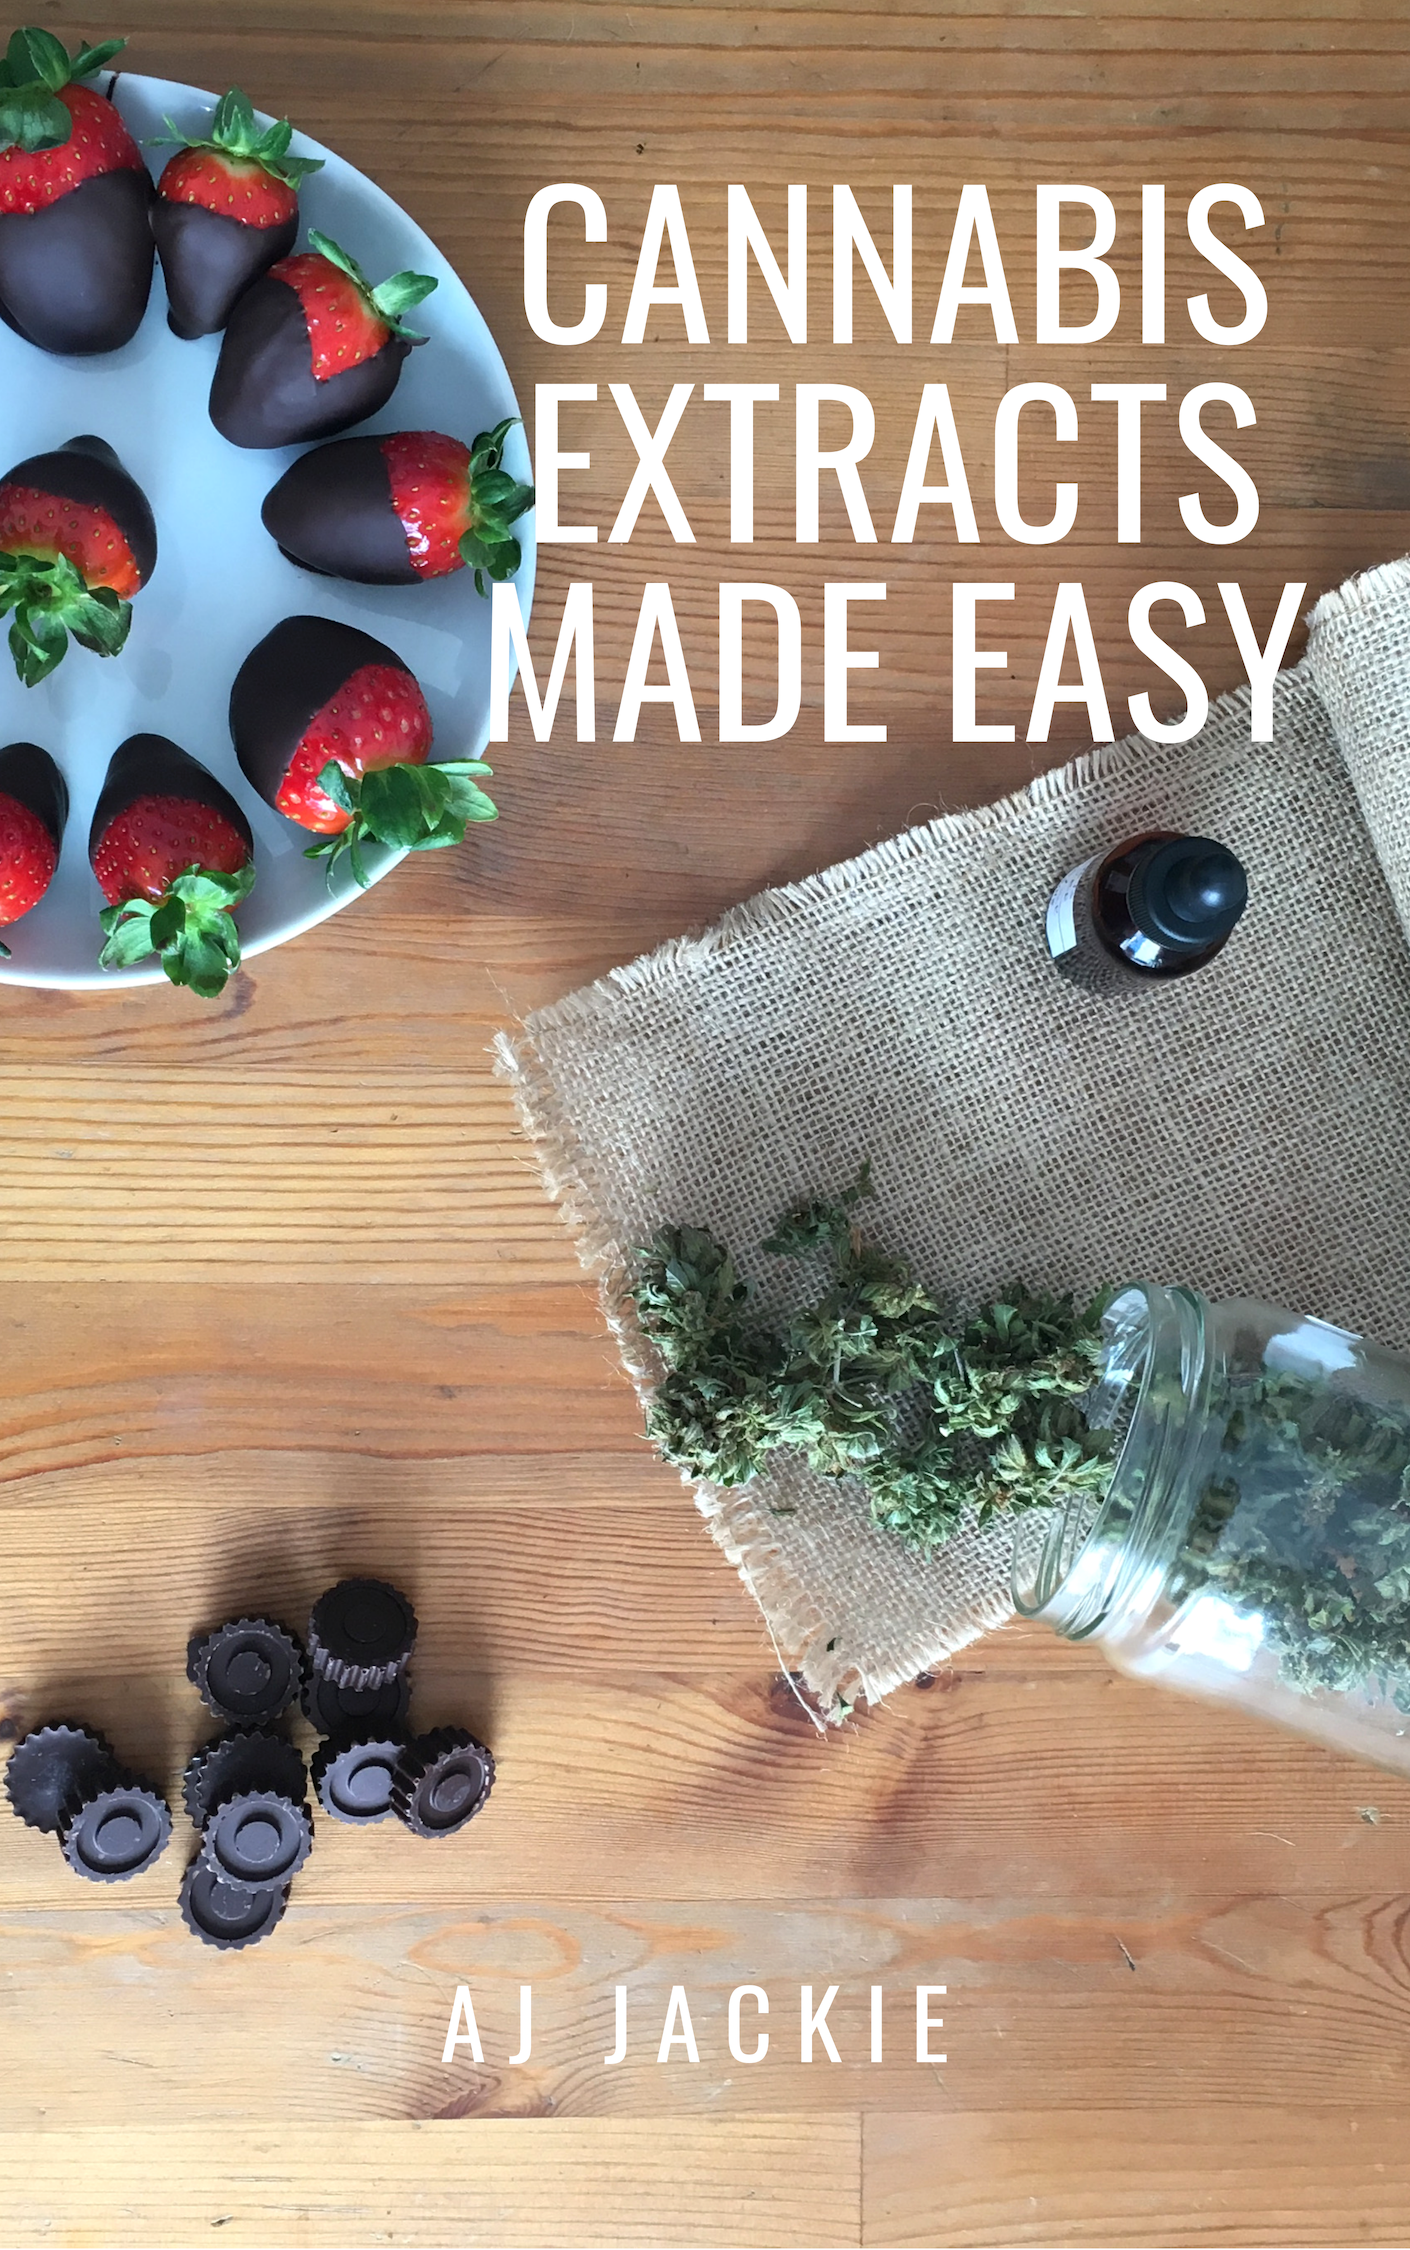 FREE: Cannabis Extracts Made Easy: The History of cannabis, Different Strains, Medical Benefits, DIY Extracts & Recipes with dosage calculation by AJ Jackie